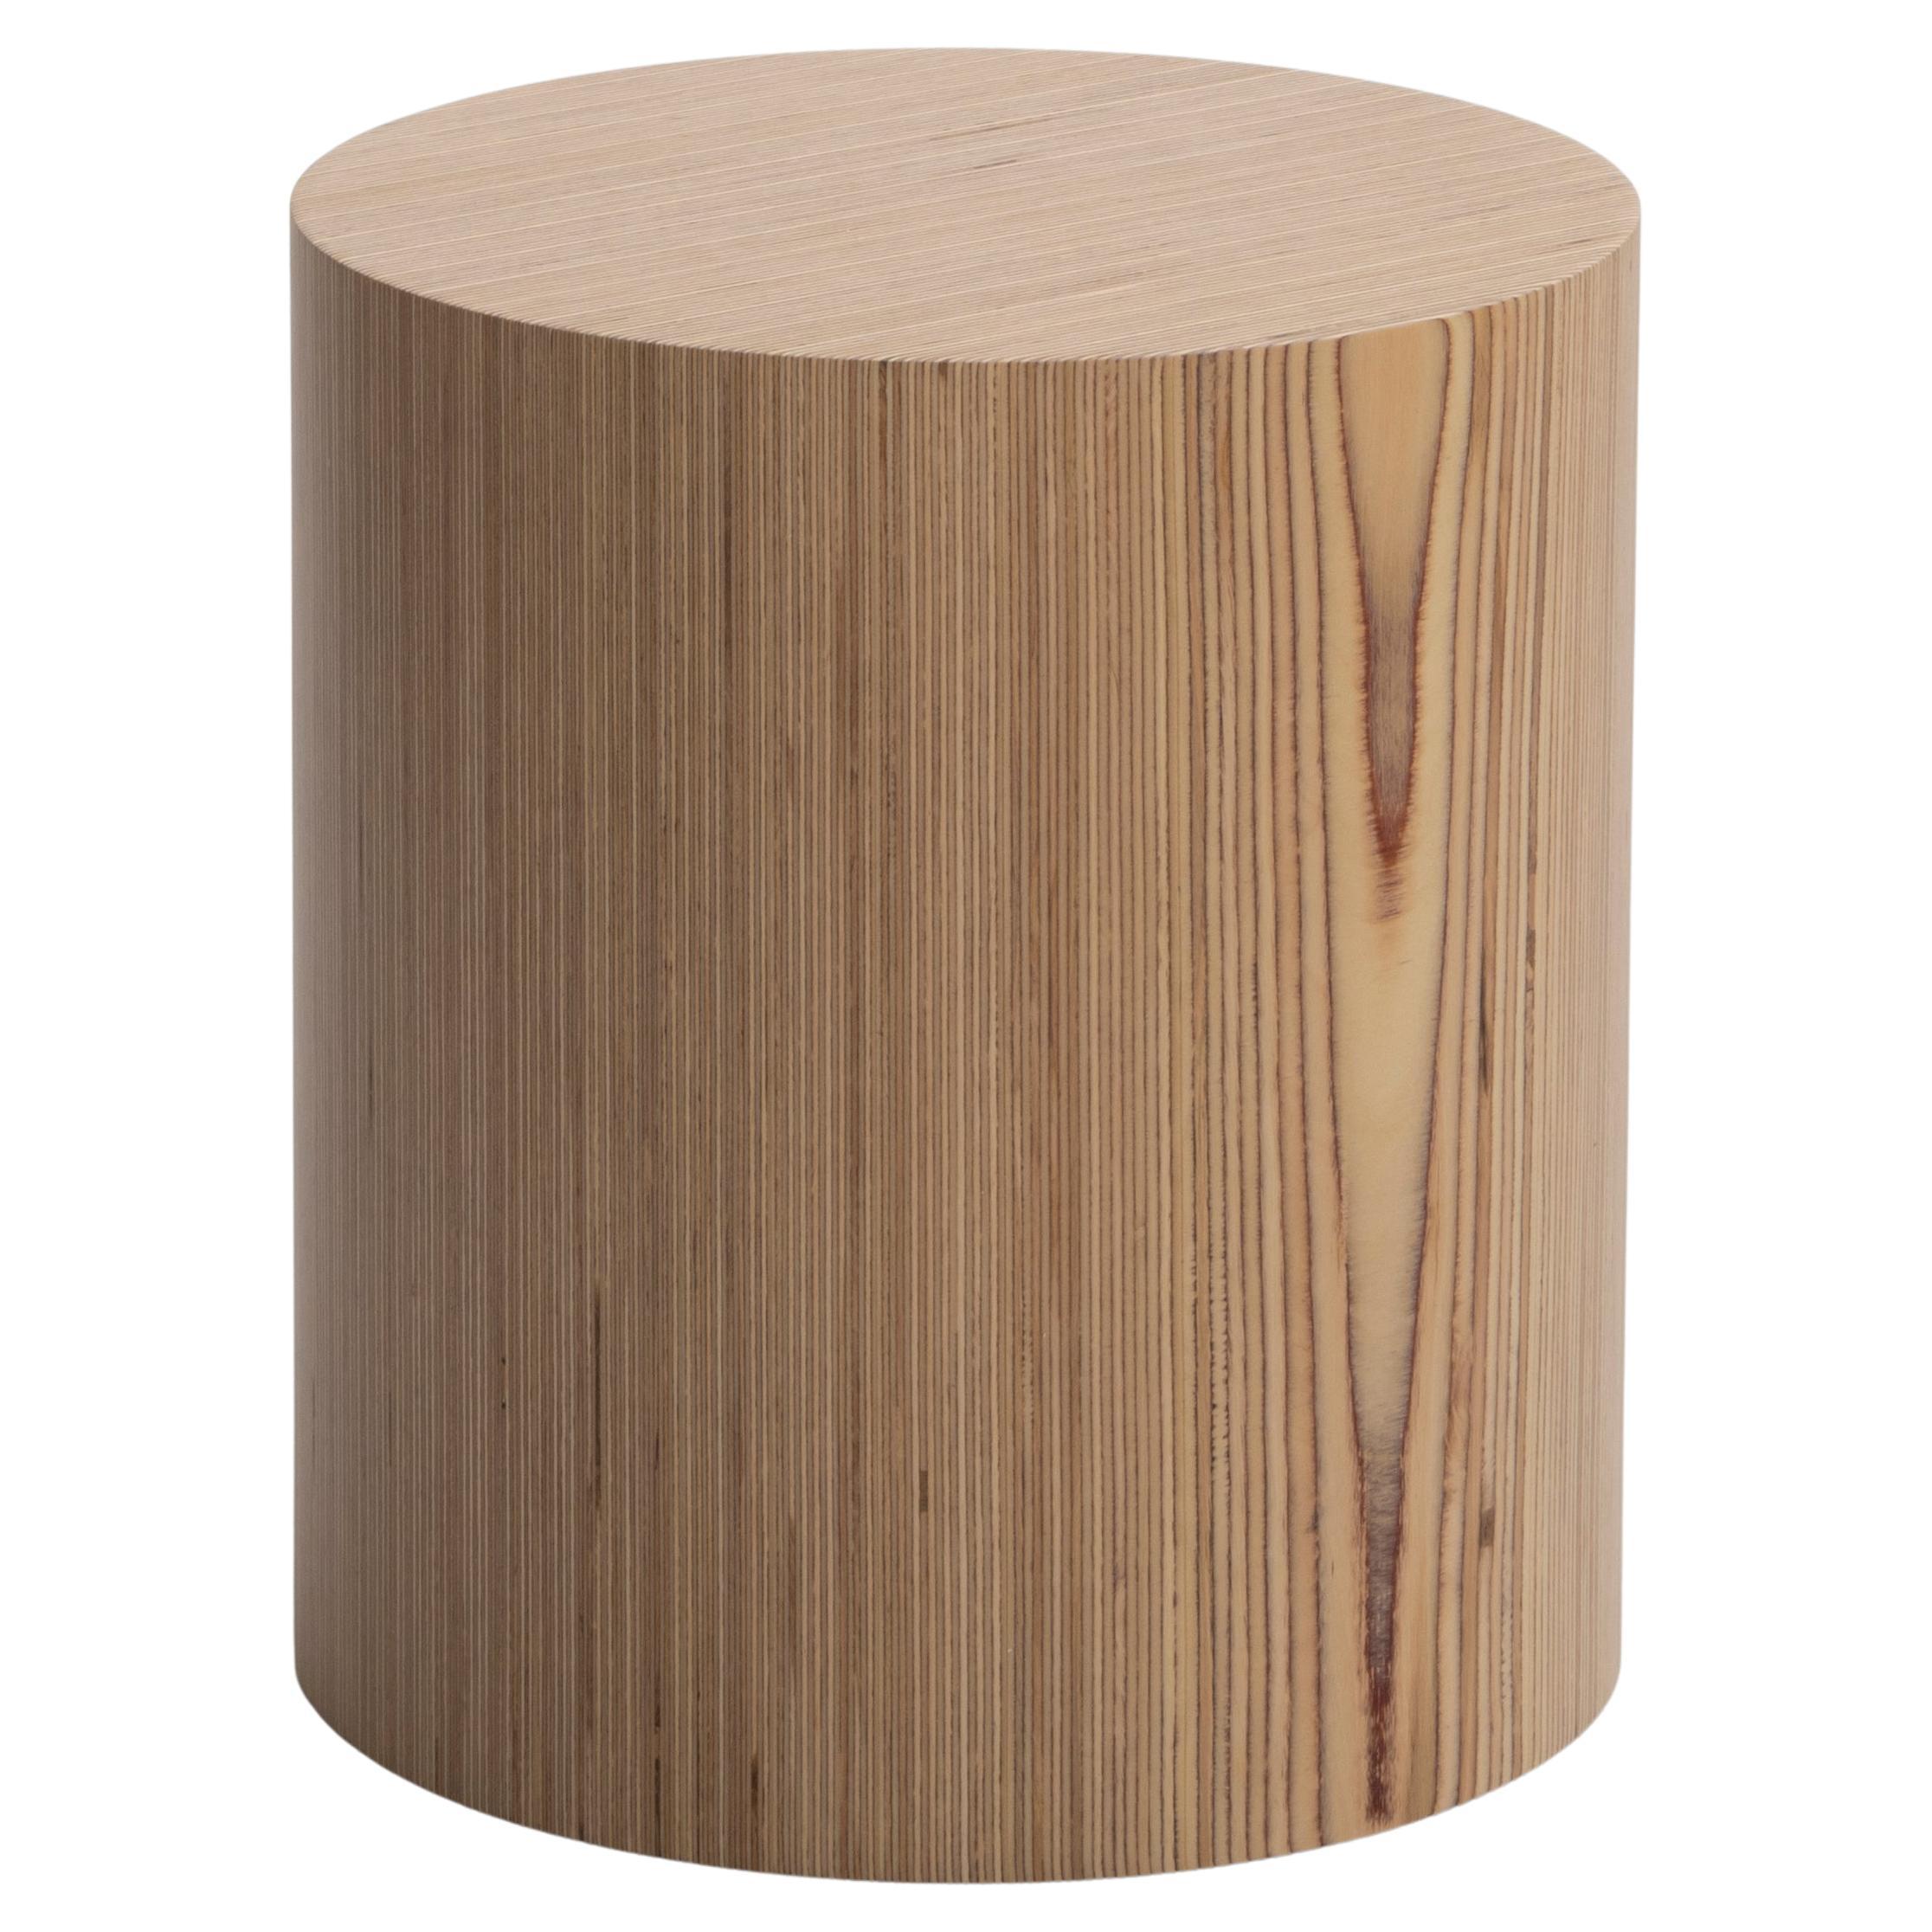 Stack Vert Stool by Timbur, Represented by Tuleste Factory